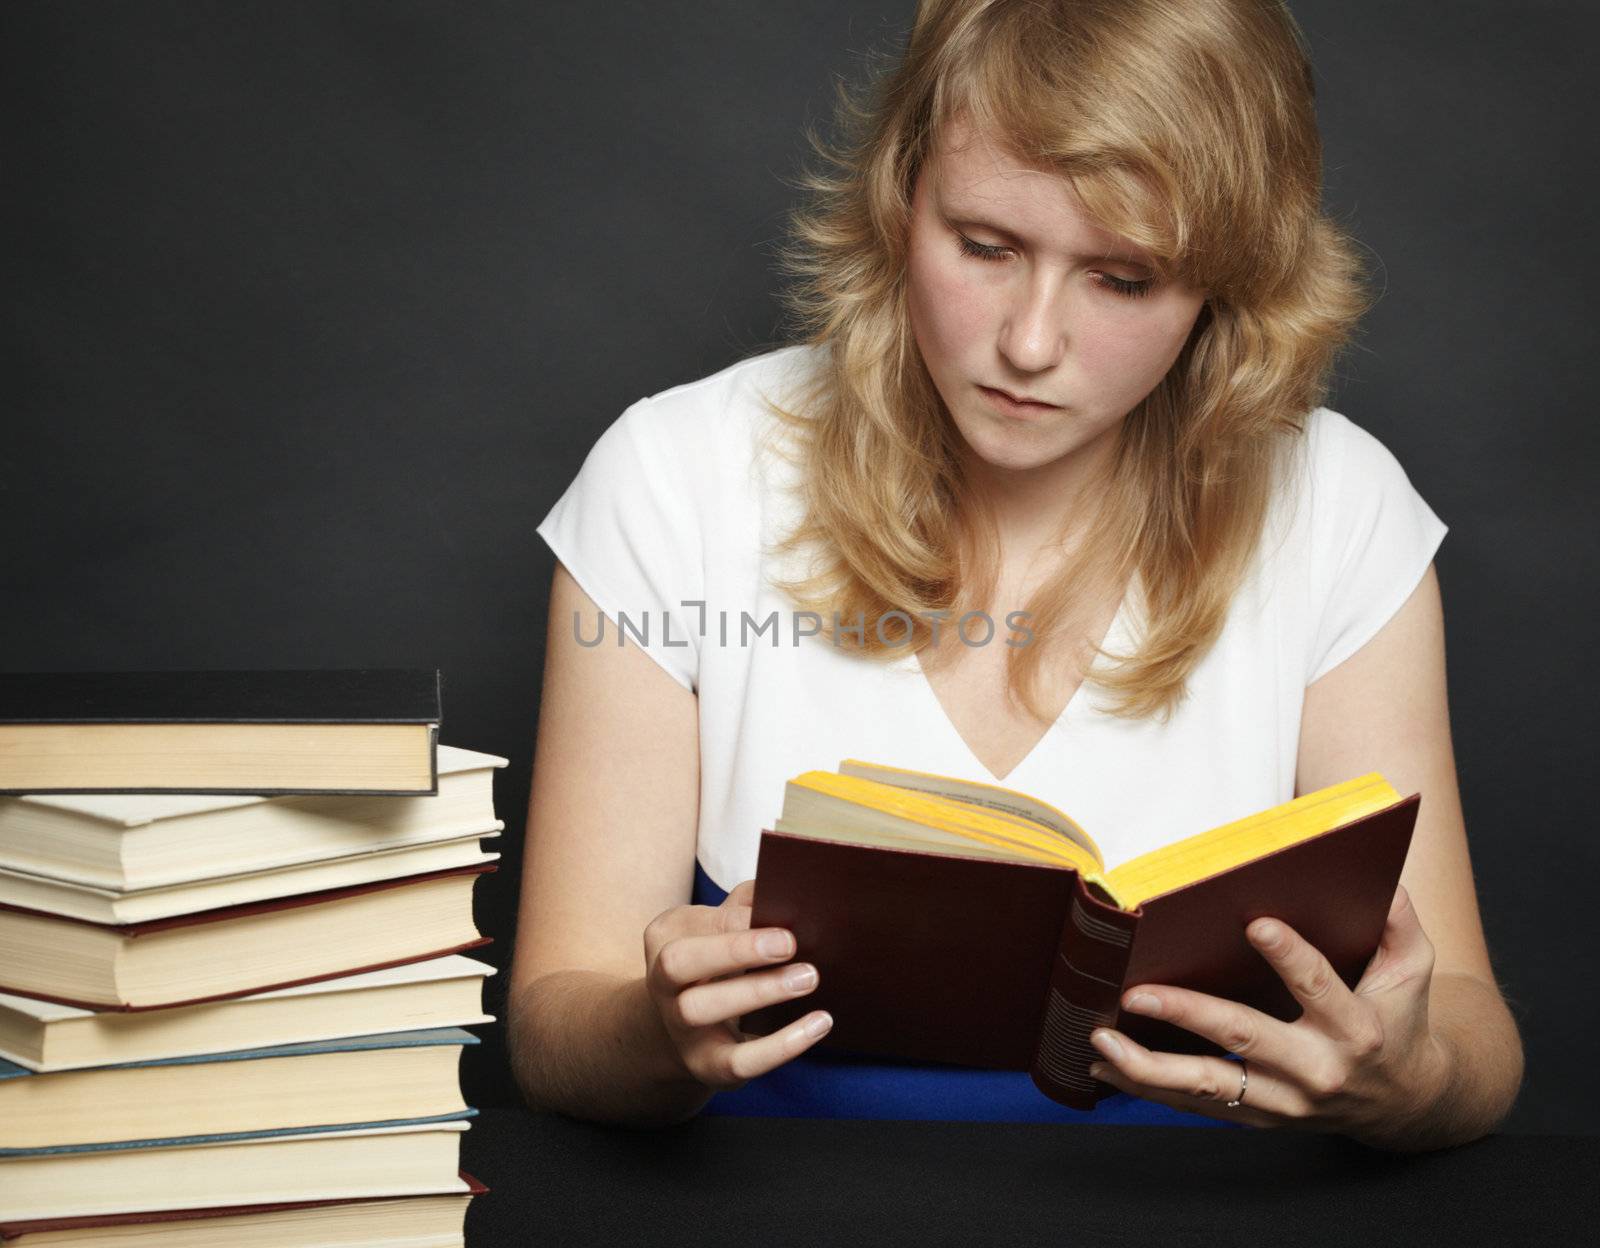 Young woman reads book against dark background by pzaxe